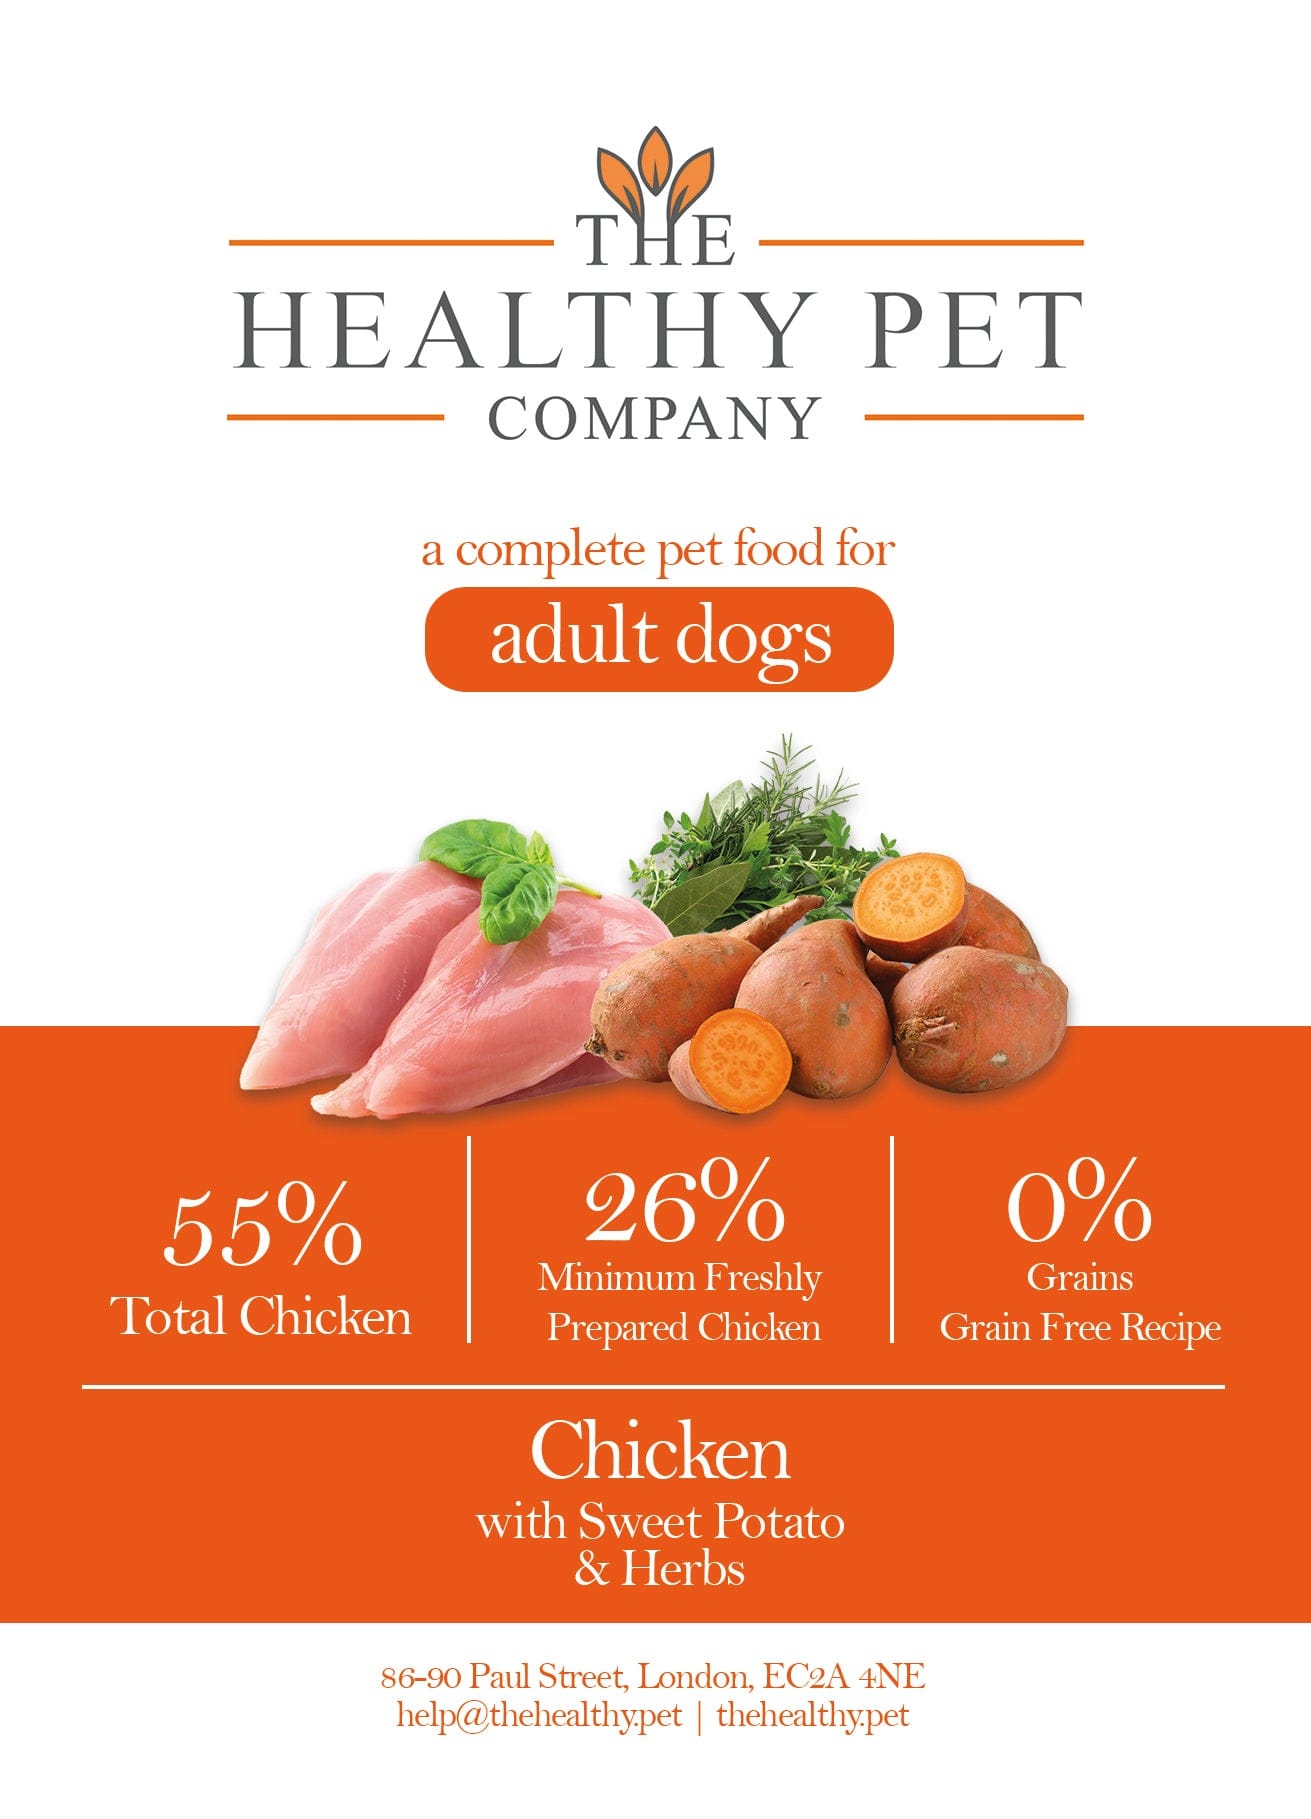 The Healthy Pet Company Complete Meal - Chicken with Sweet Potato & Herbs for Adult Dogs - The Healthy Pet Company